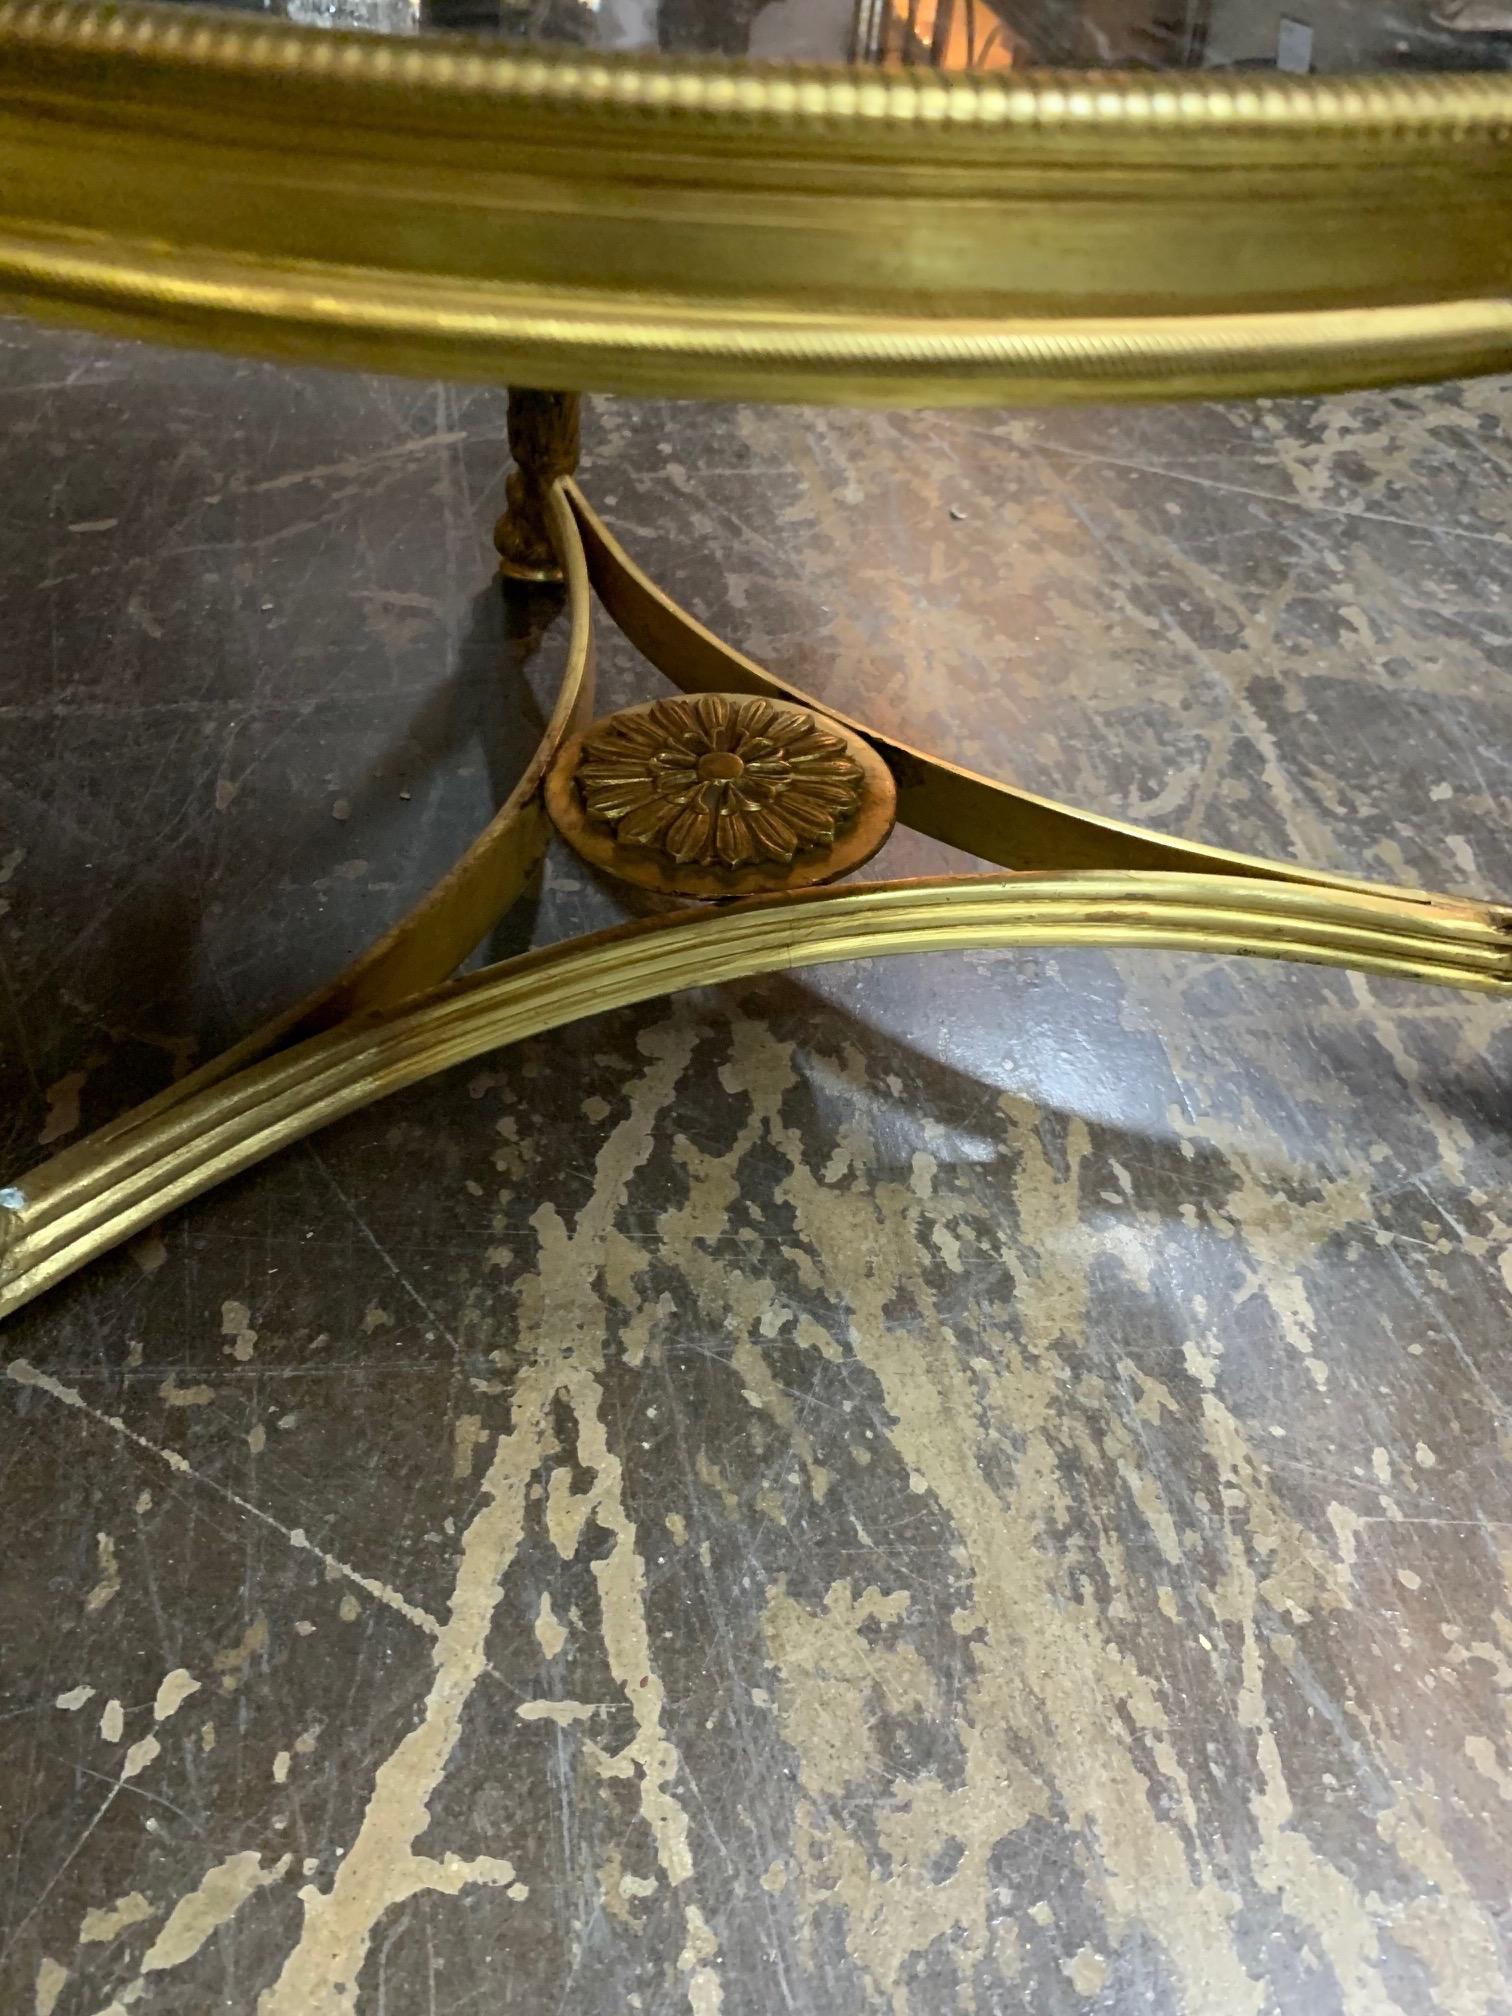 Very fine 19th century French gilt bronze and marble gueridon table. Exceptional details on the brass including ram's heads on the corners. Gorgeous marble as well! A truly elegant piece!